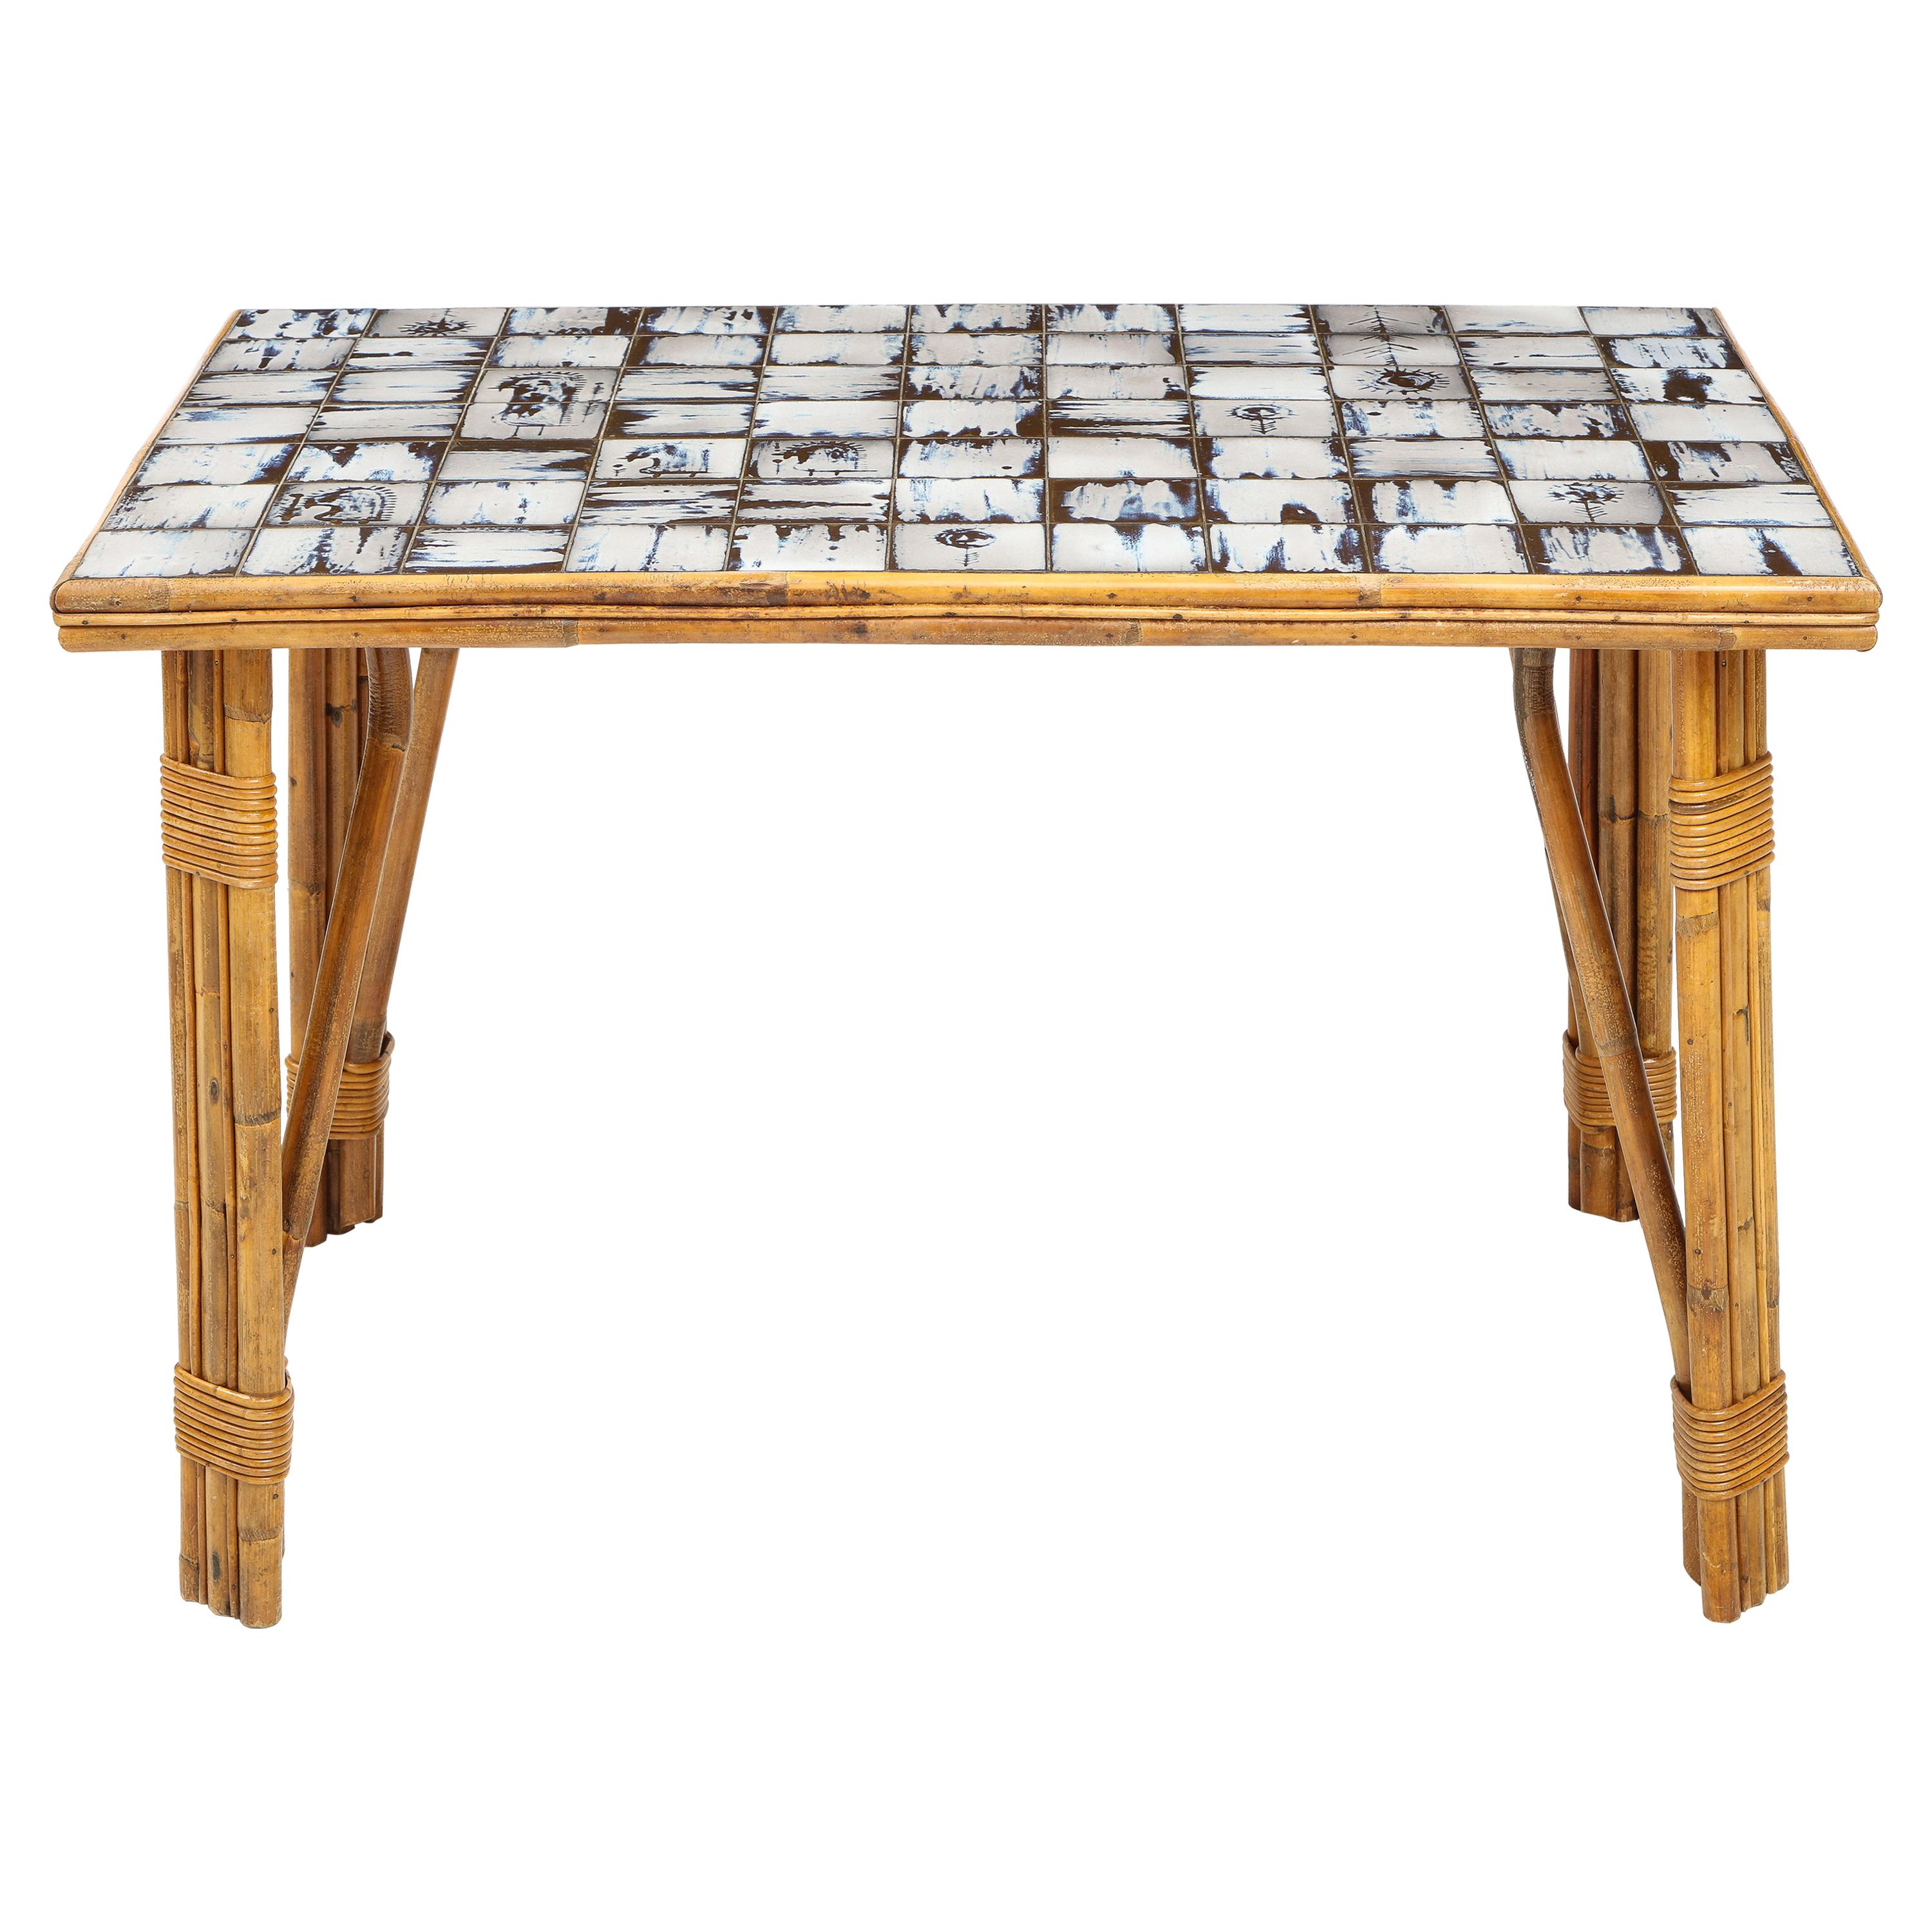 Rattan Dining Table with Hand-Painted Ceramic Tile Top, France, circa 1950